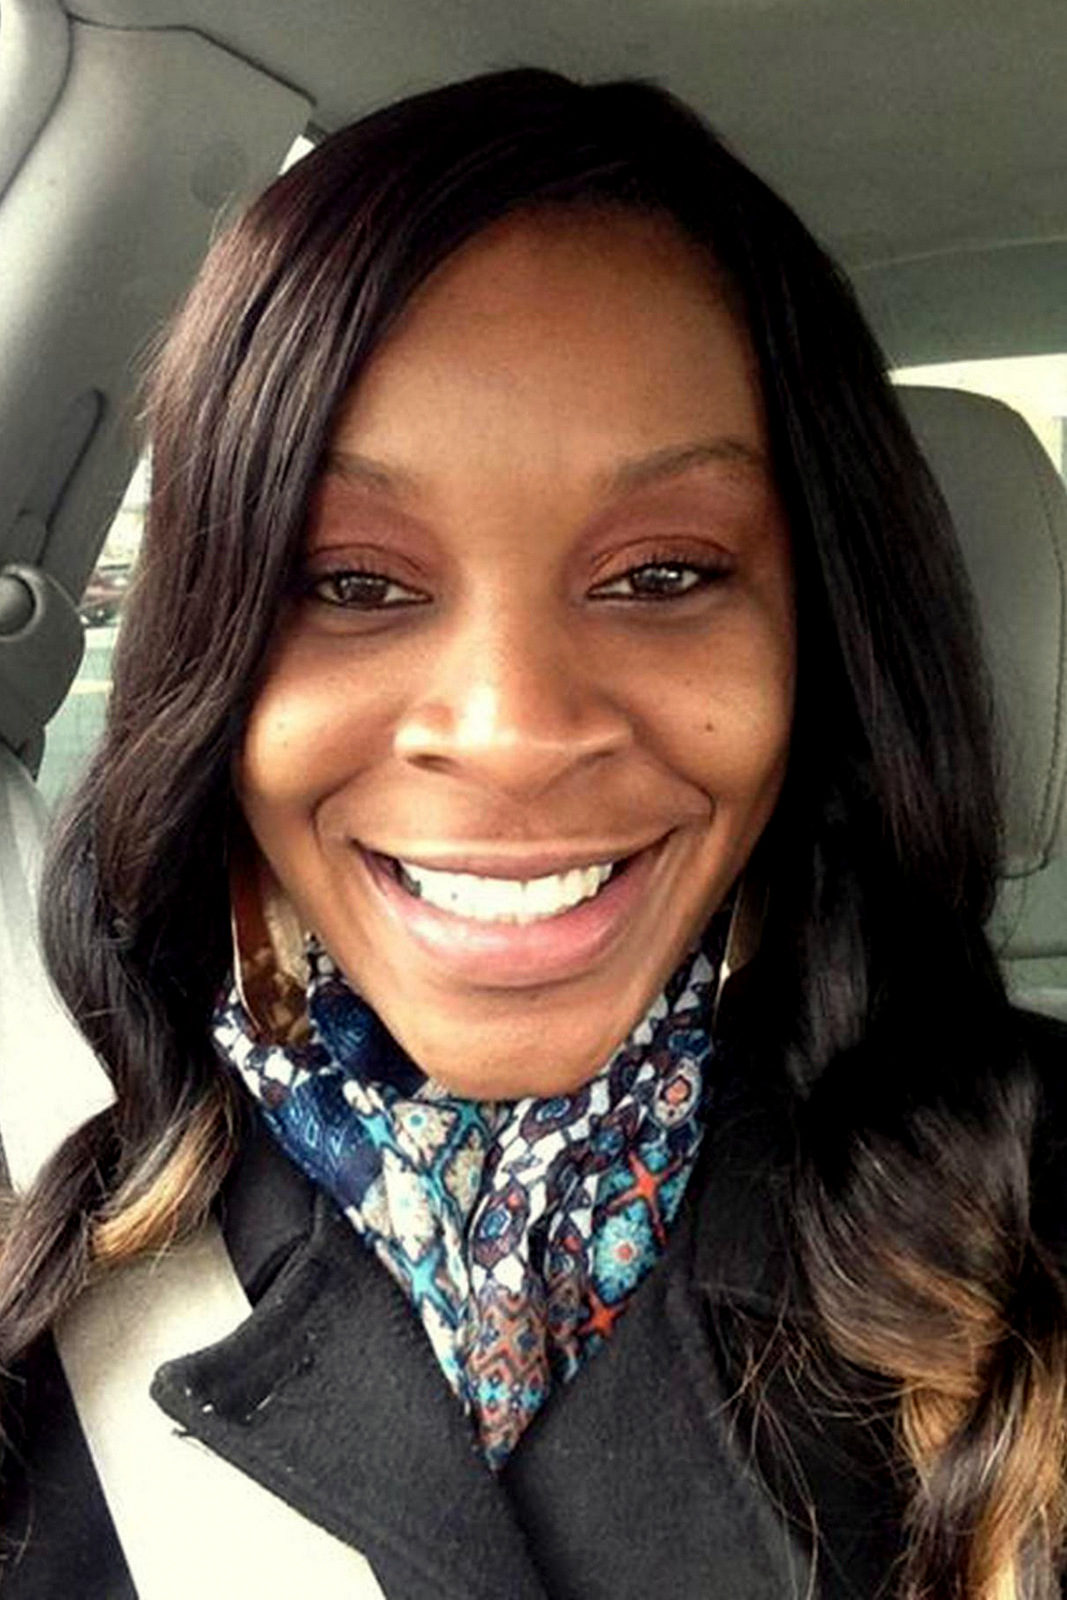 Texas Department Of Public Safety Settles With Family Of Sandra Bland For $1.9M